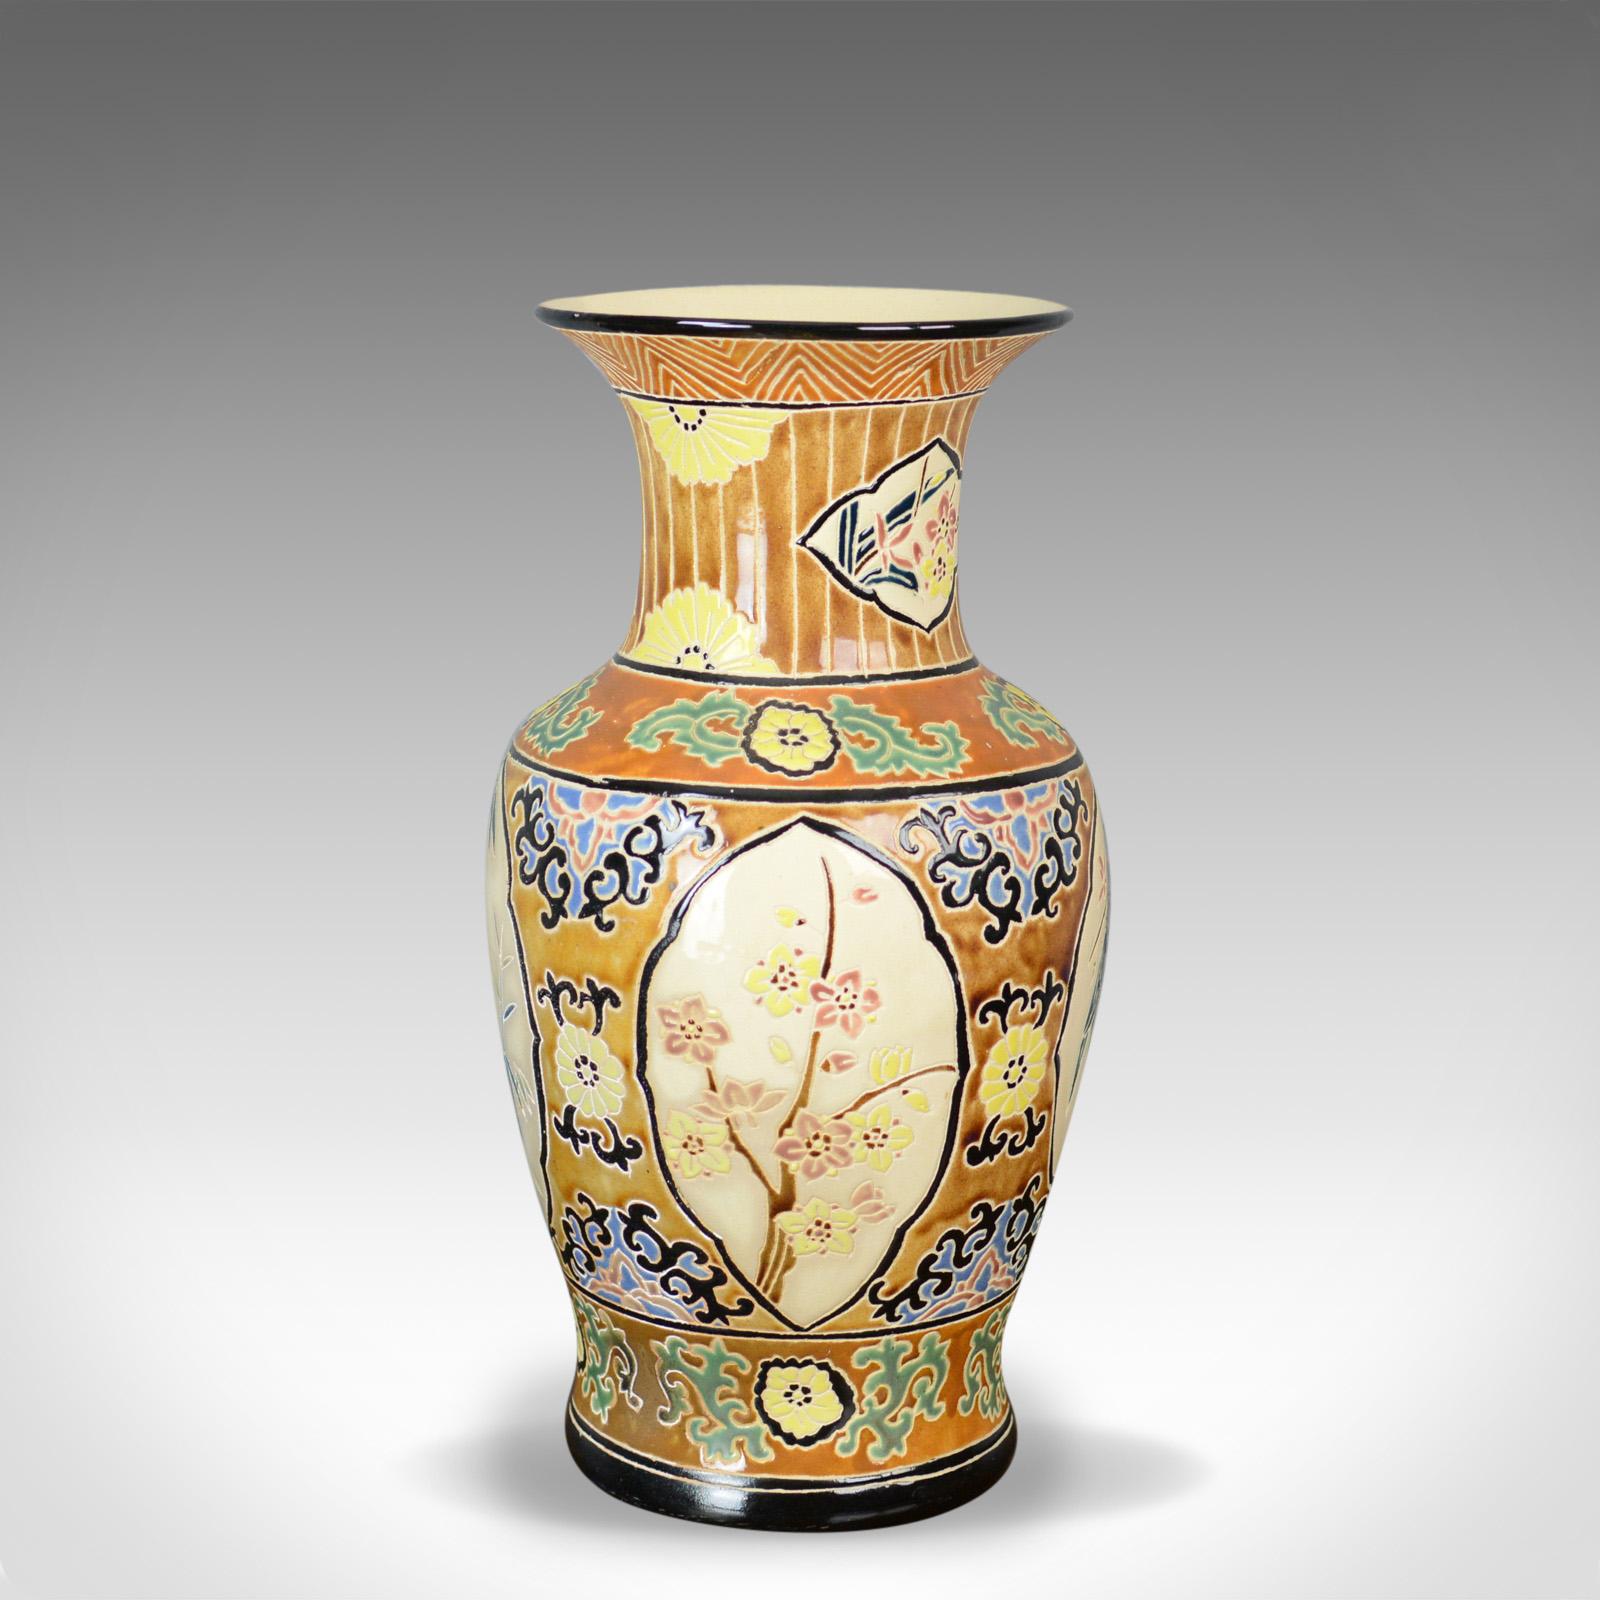 This is a large vase, a vintage oriental baluster vase highly decorated with panel scenes dating to the mid-late 20th century.

Of Classic form and in good proportion
Of quality craftsmanship, free from damage
Unmarked base displays some